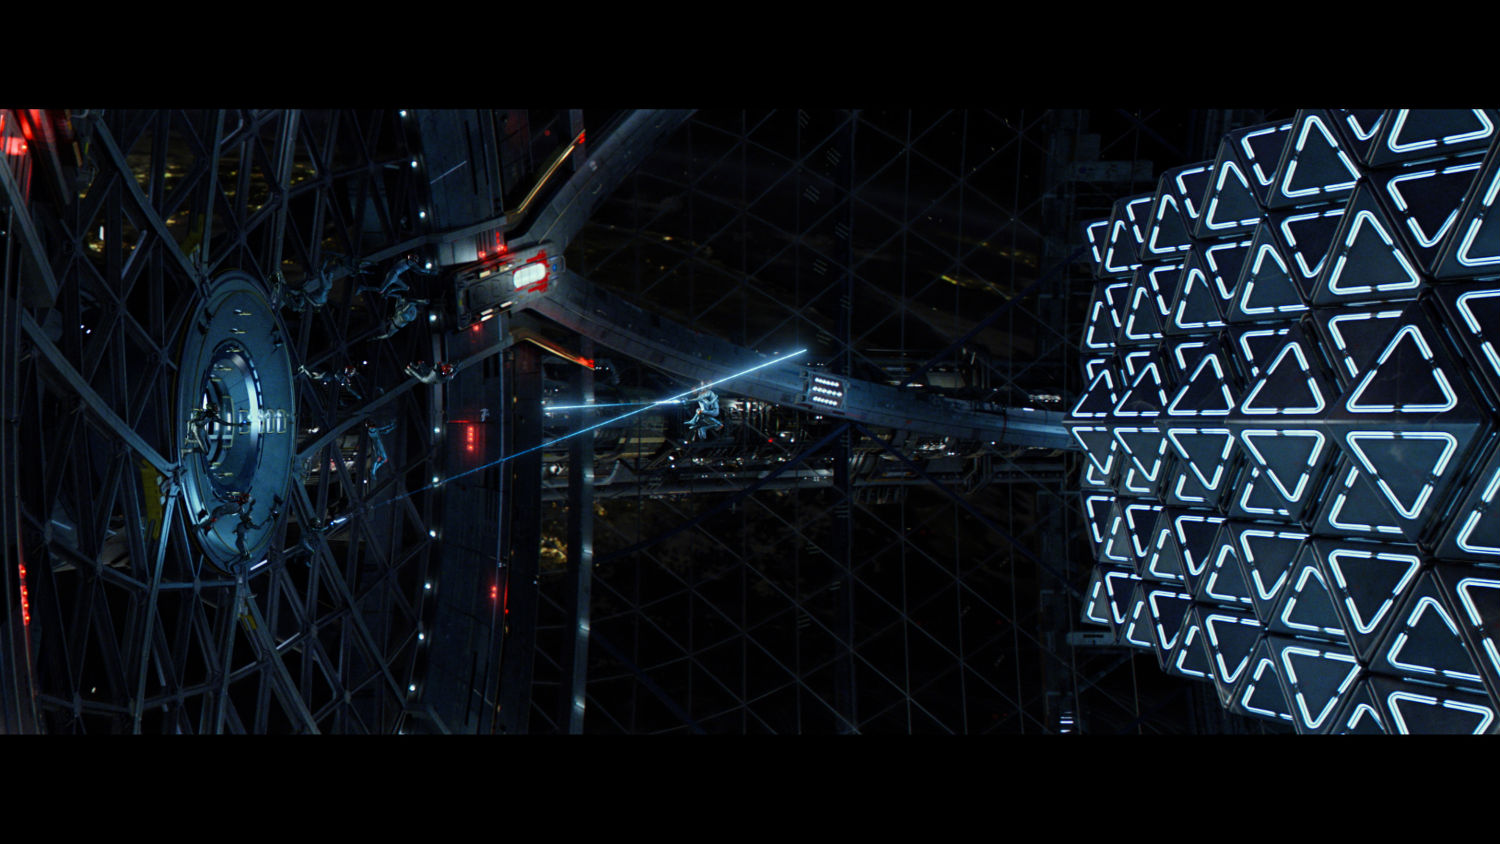 'Ender's Game' Set Visit: 30 Things We Learned About the Film and